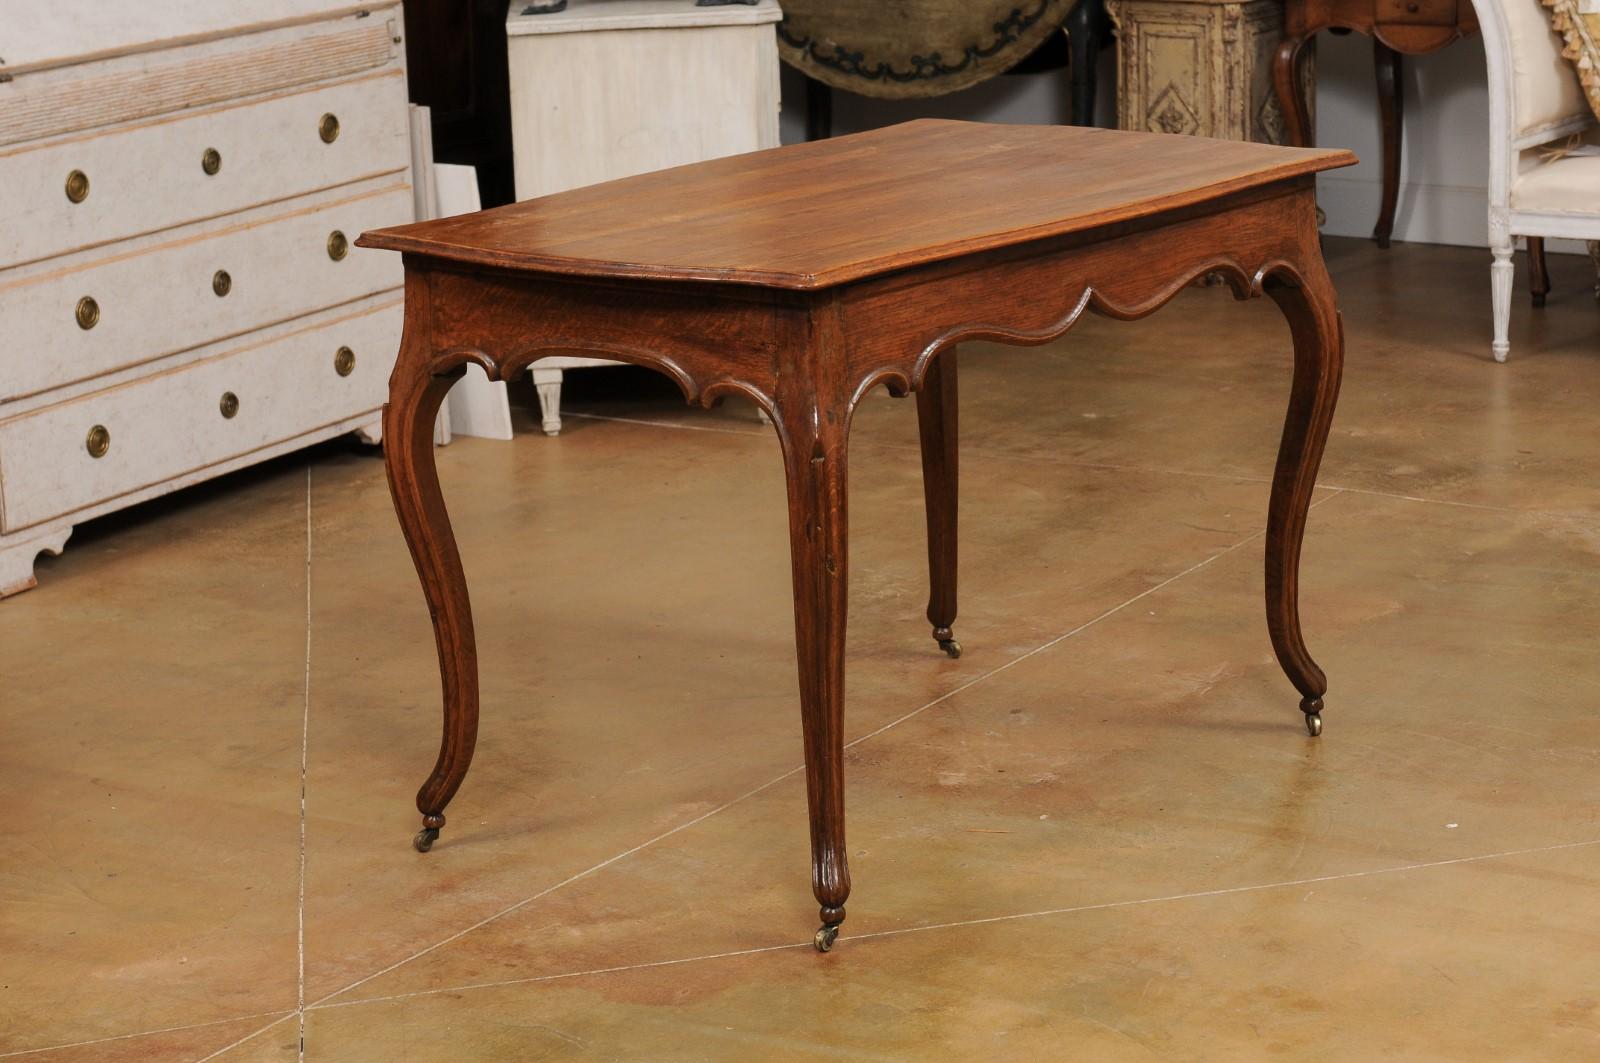 Italian Rococo Early 19th Century Oak Table with Carved Apron and Cabriole Legs For Sale 4